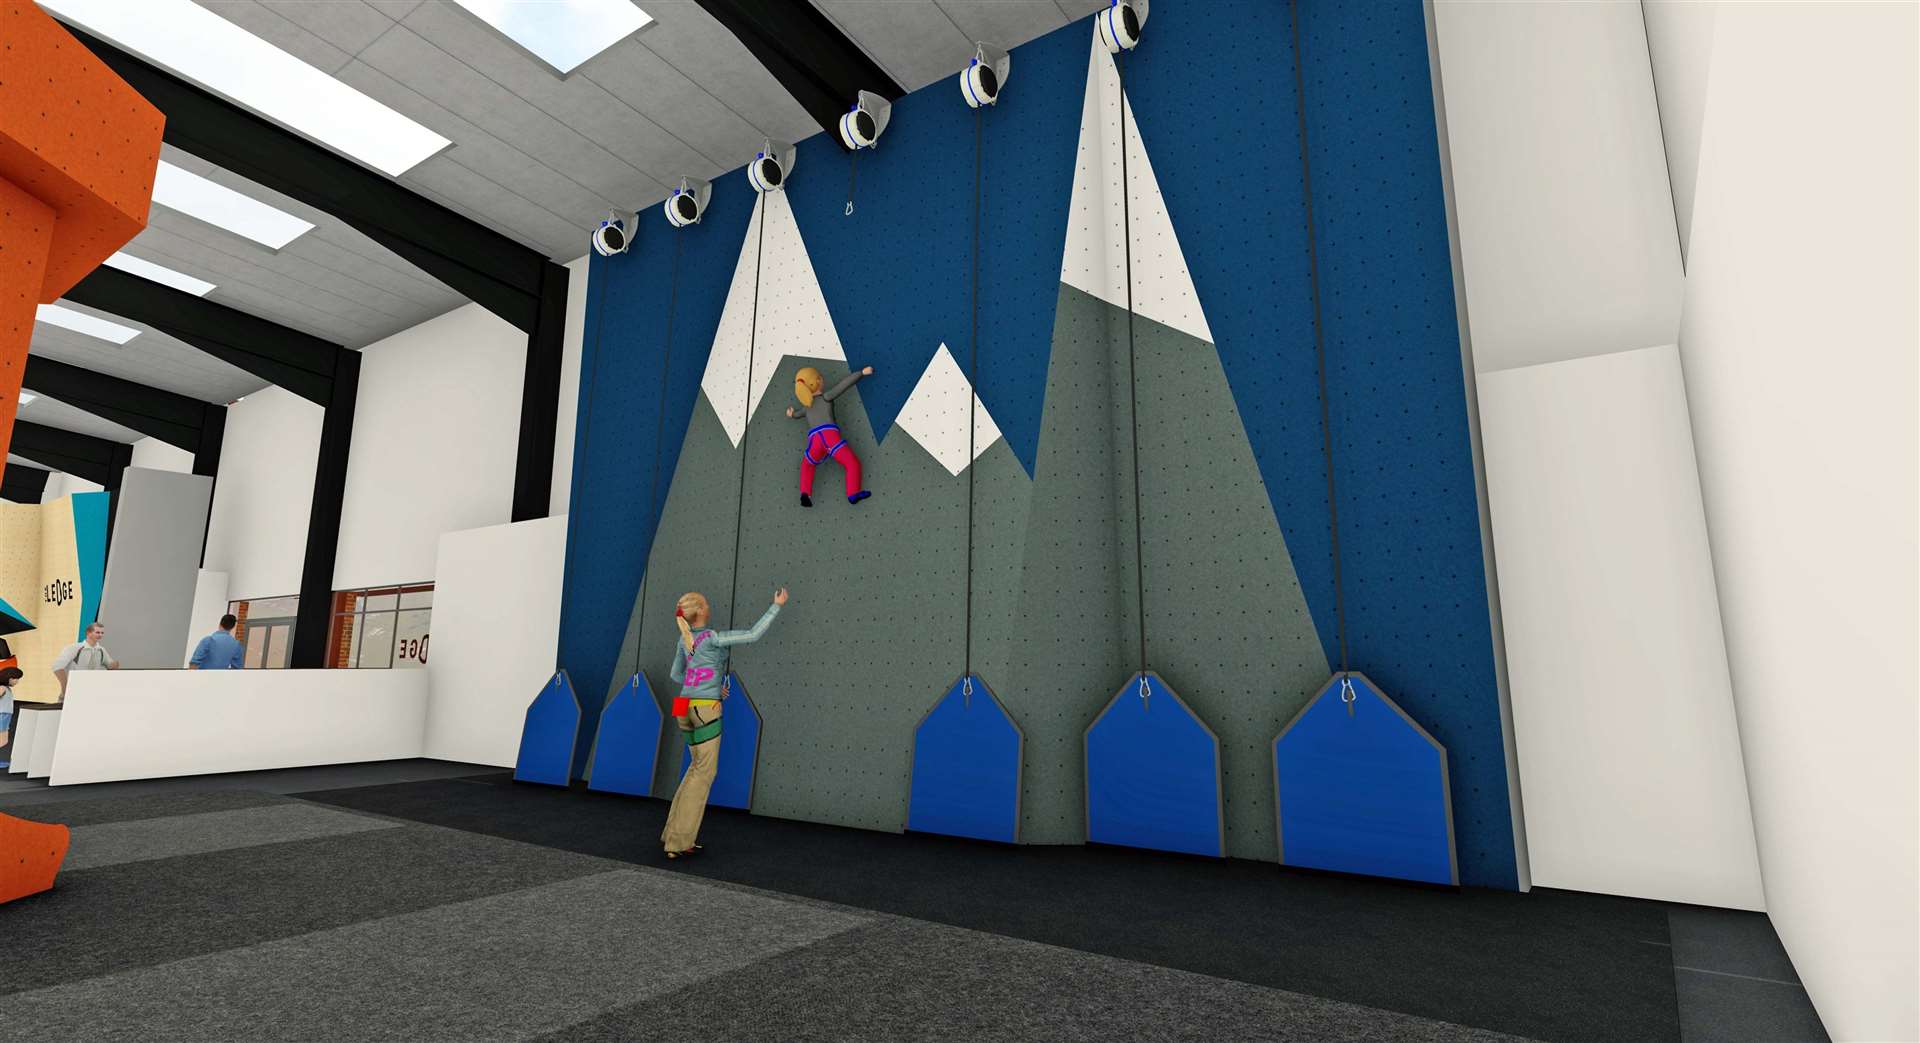 An impression of The Ledge climbing gym in Inverness.